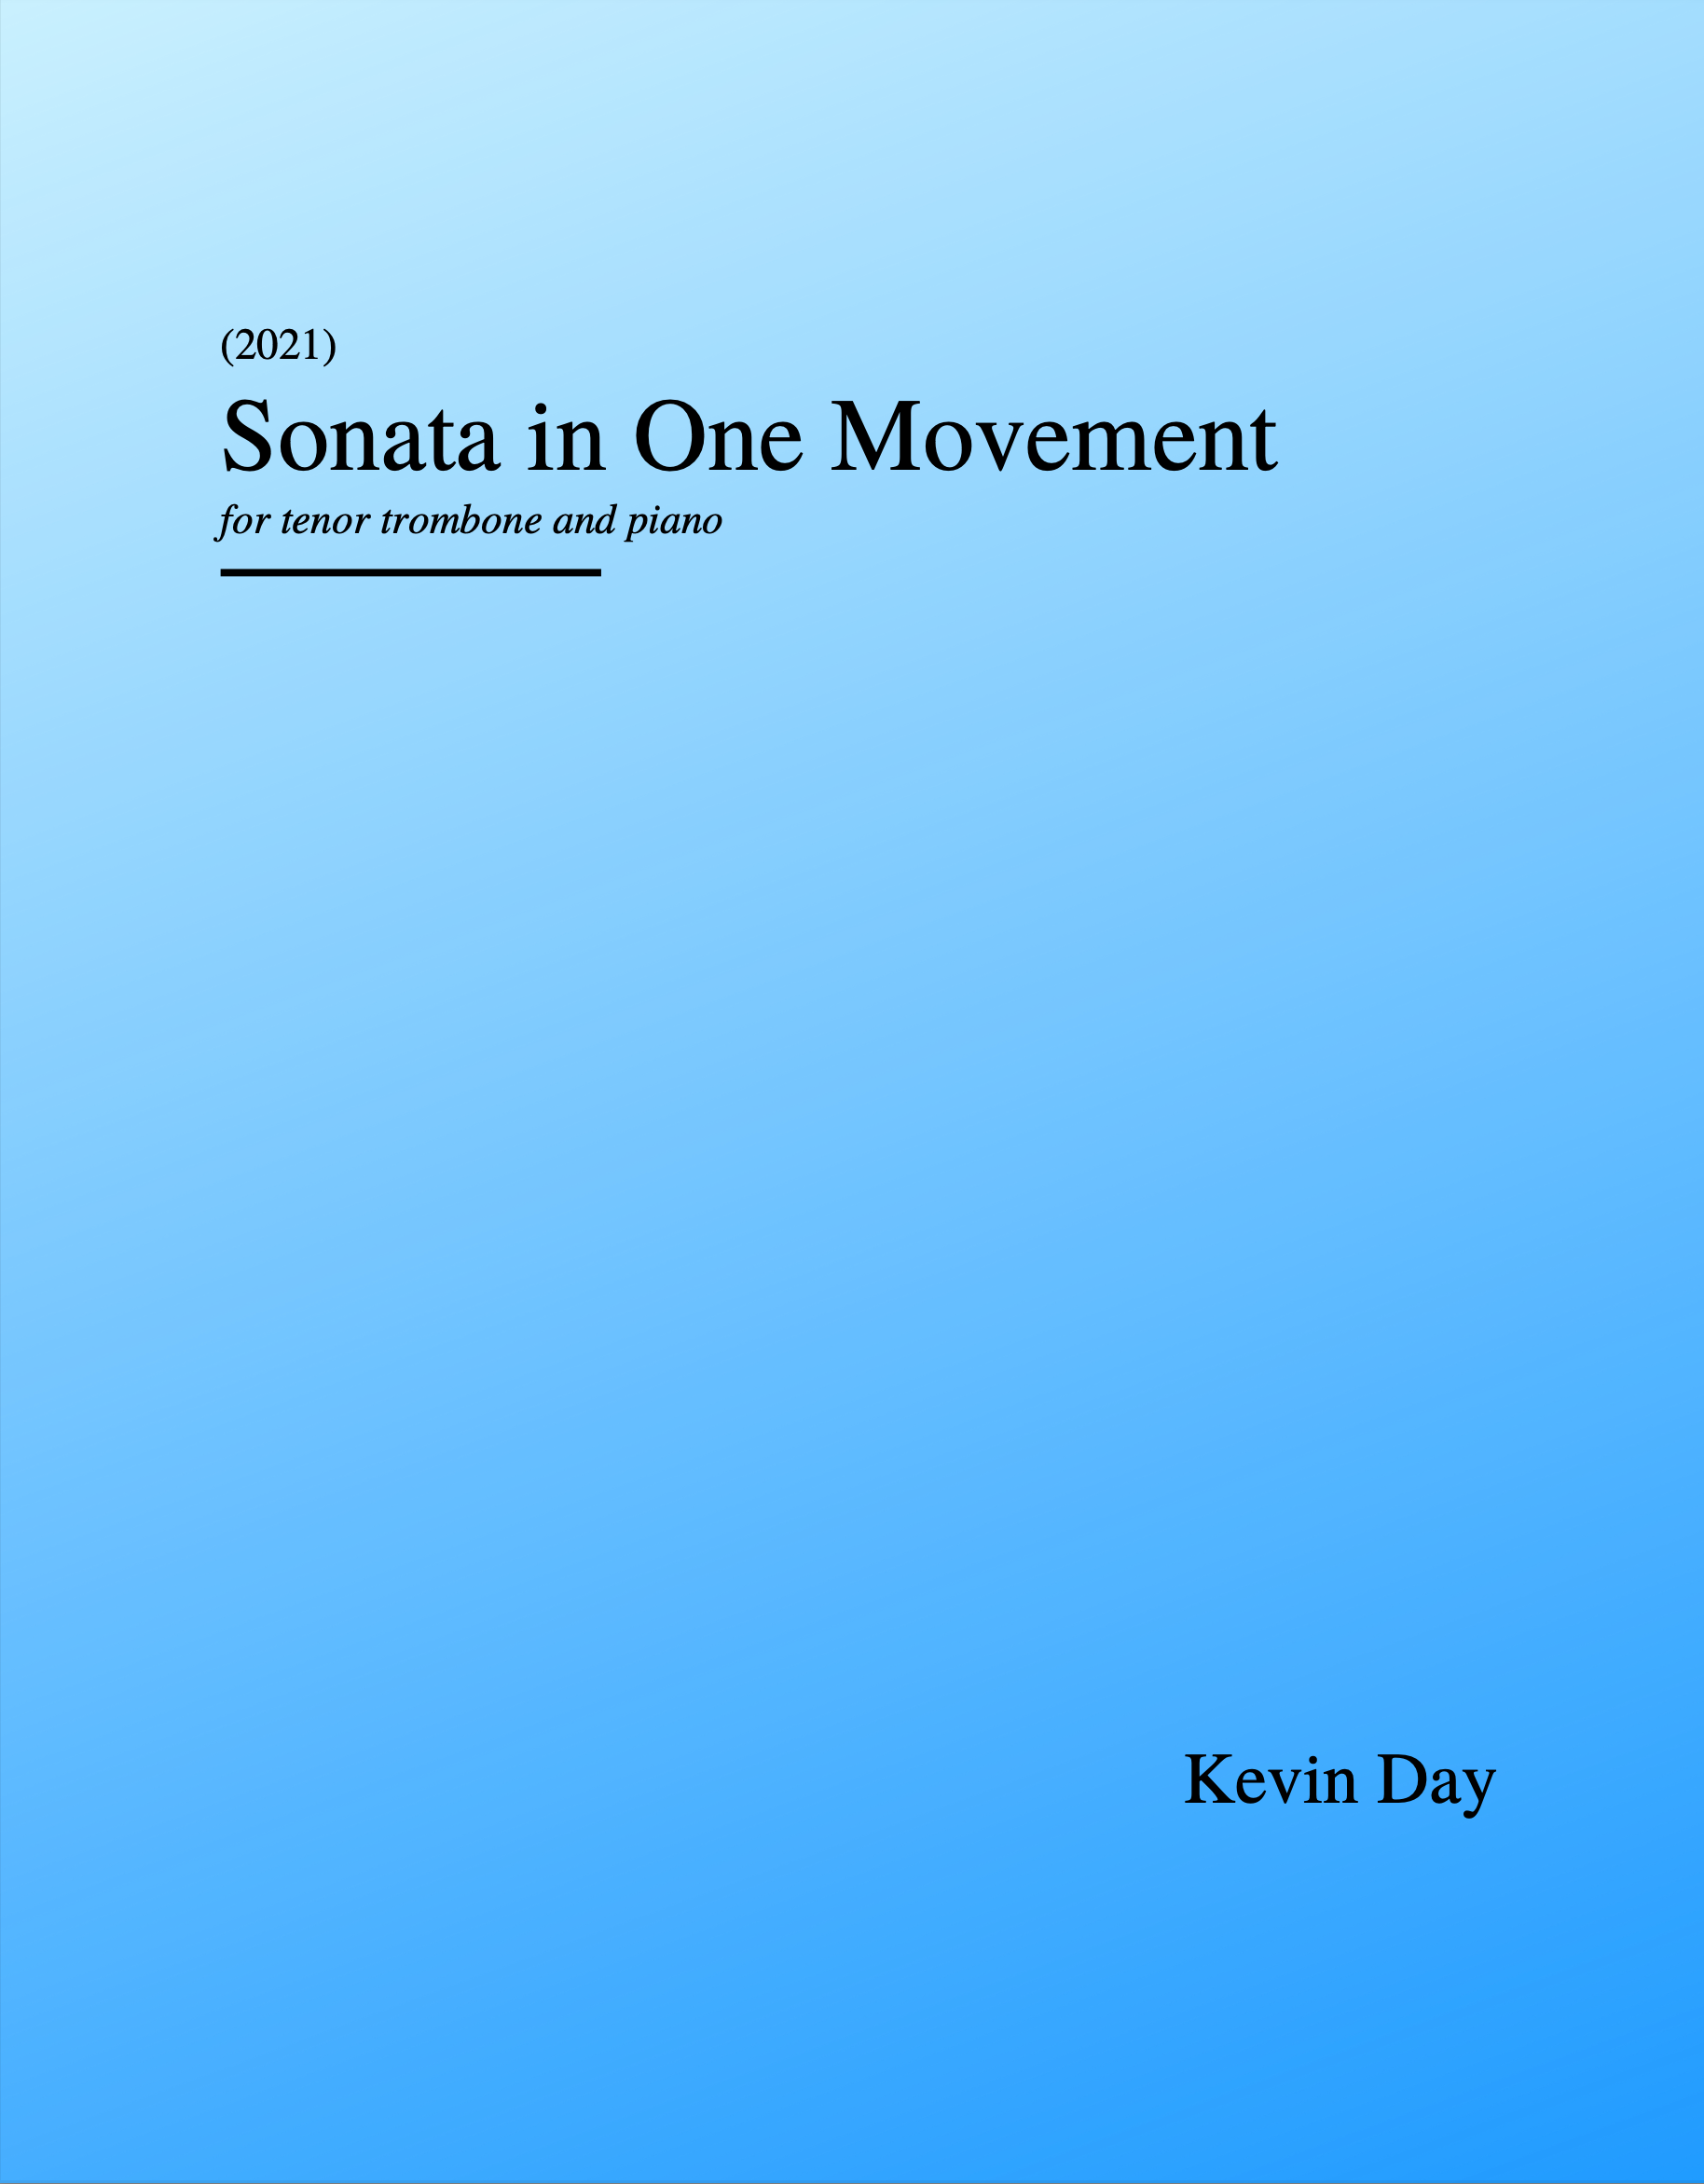 Sonata In One Movement by Kevin Day